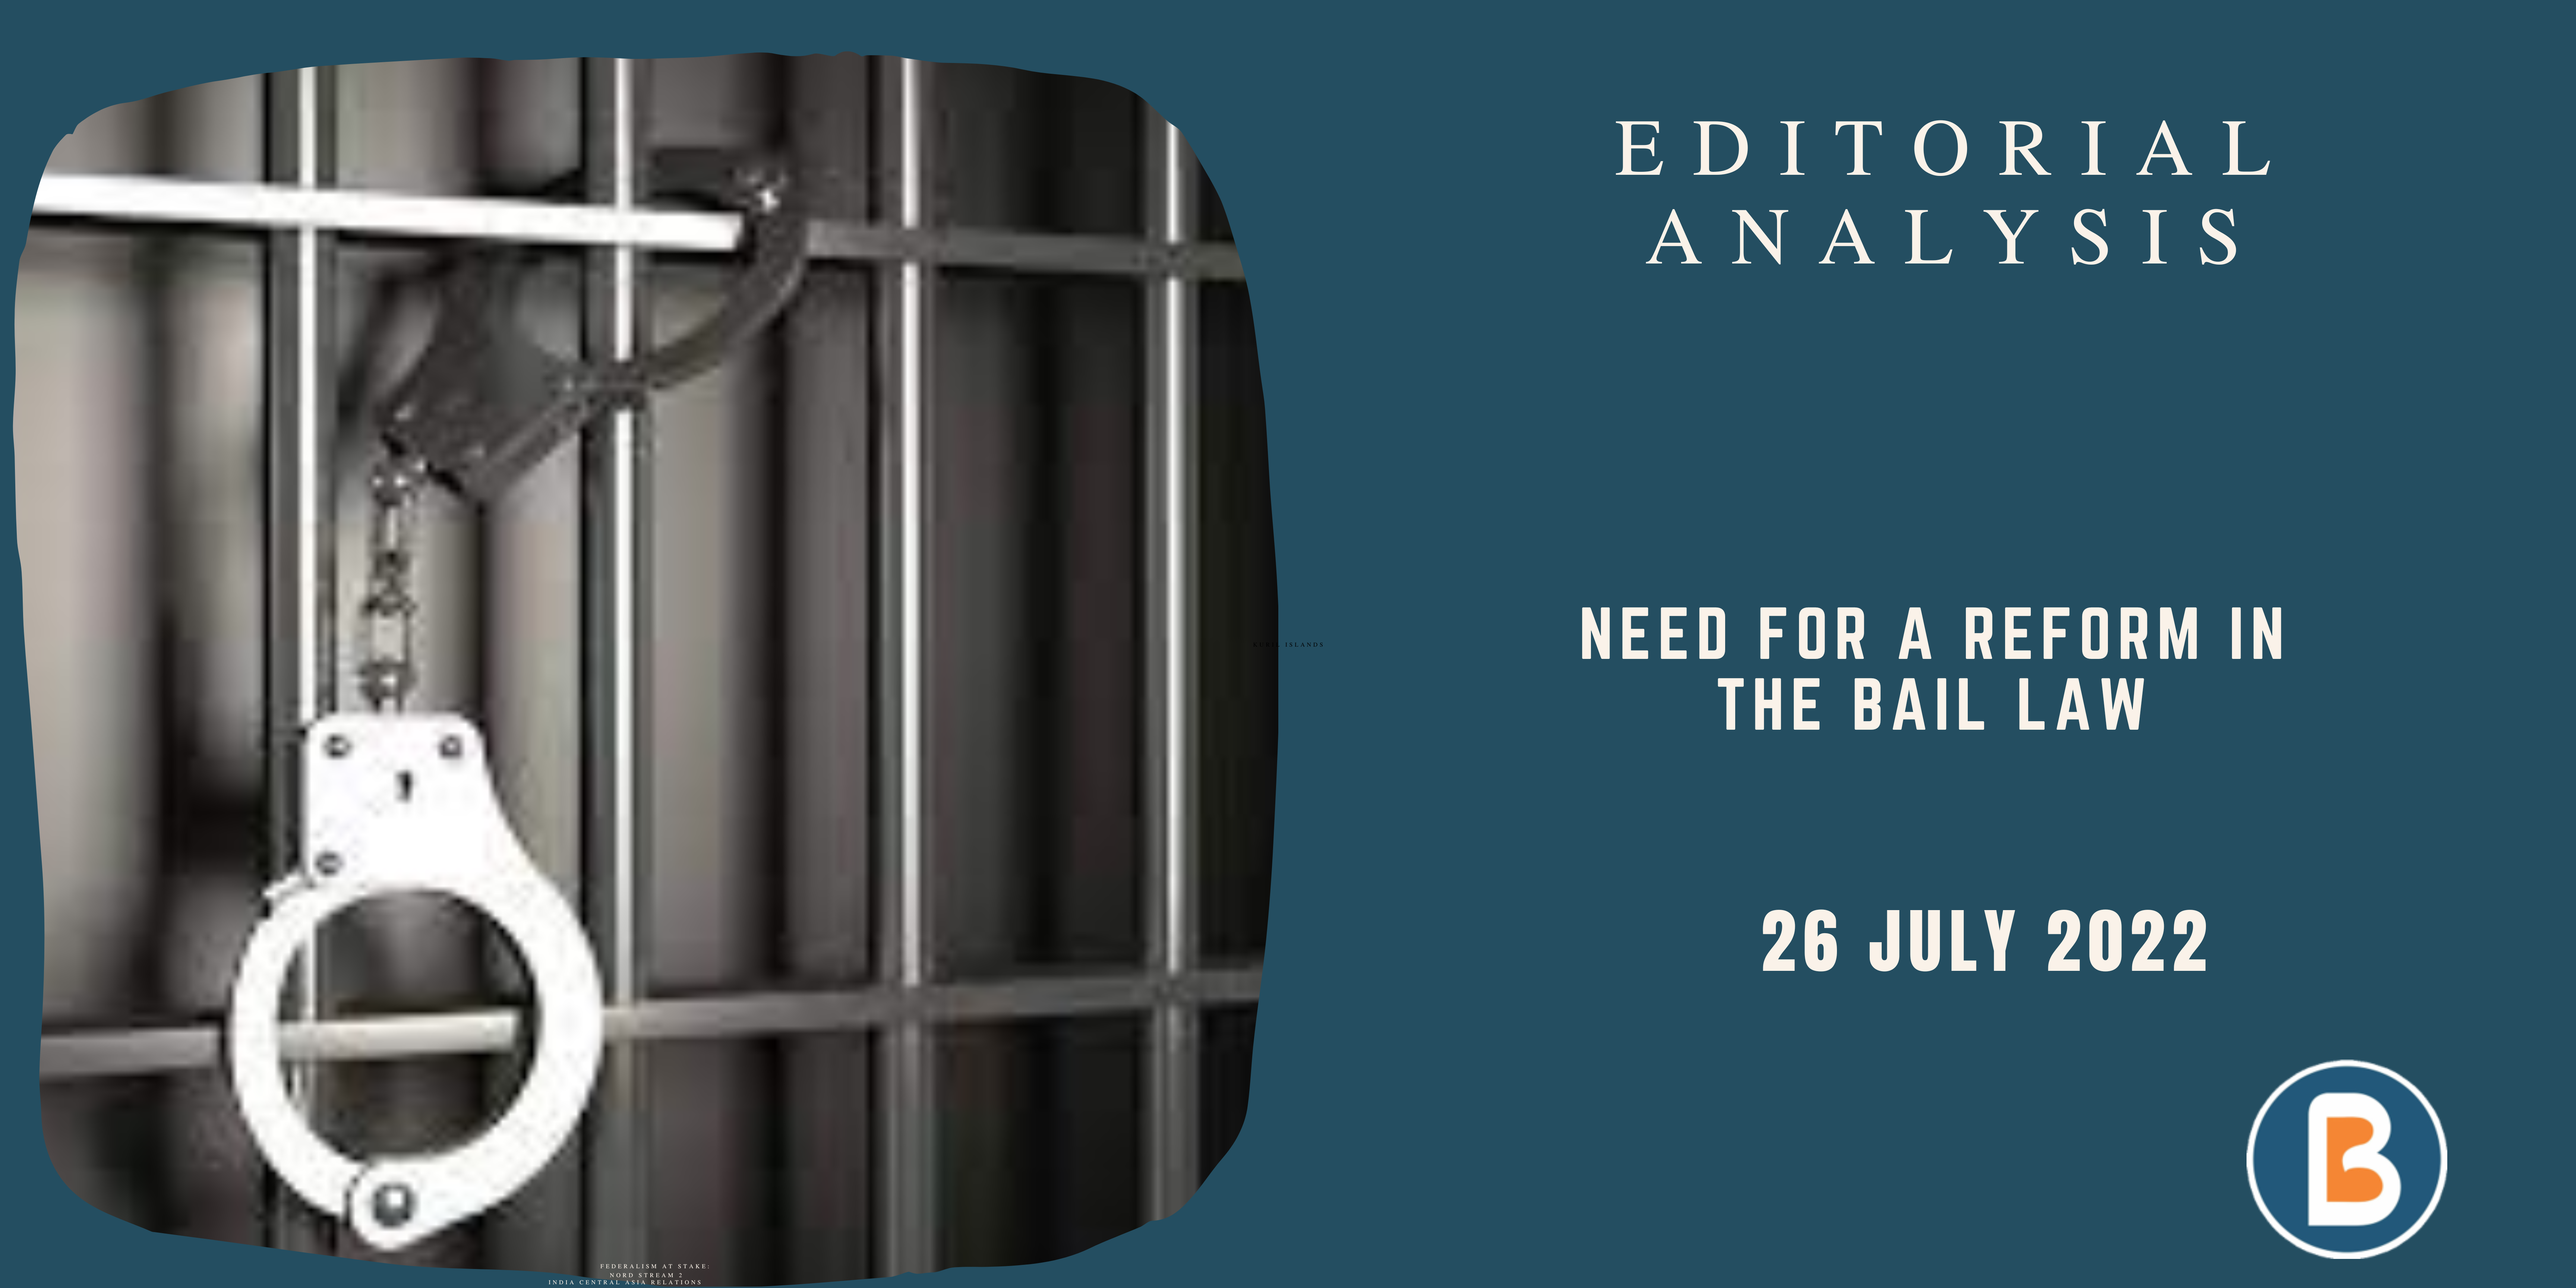 Editorial Analysis for UPSC - Need for a Reform in the Bail Law